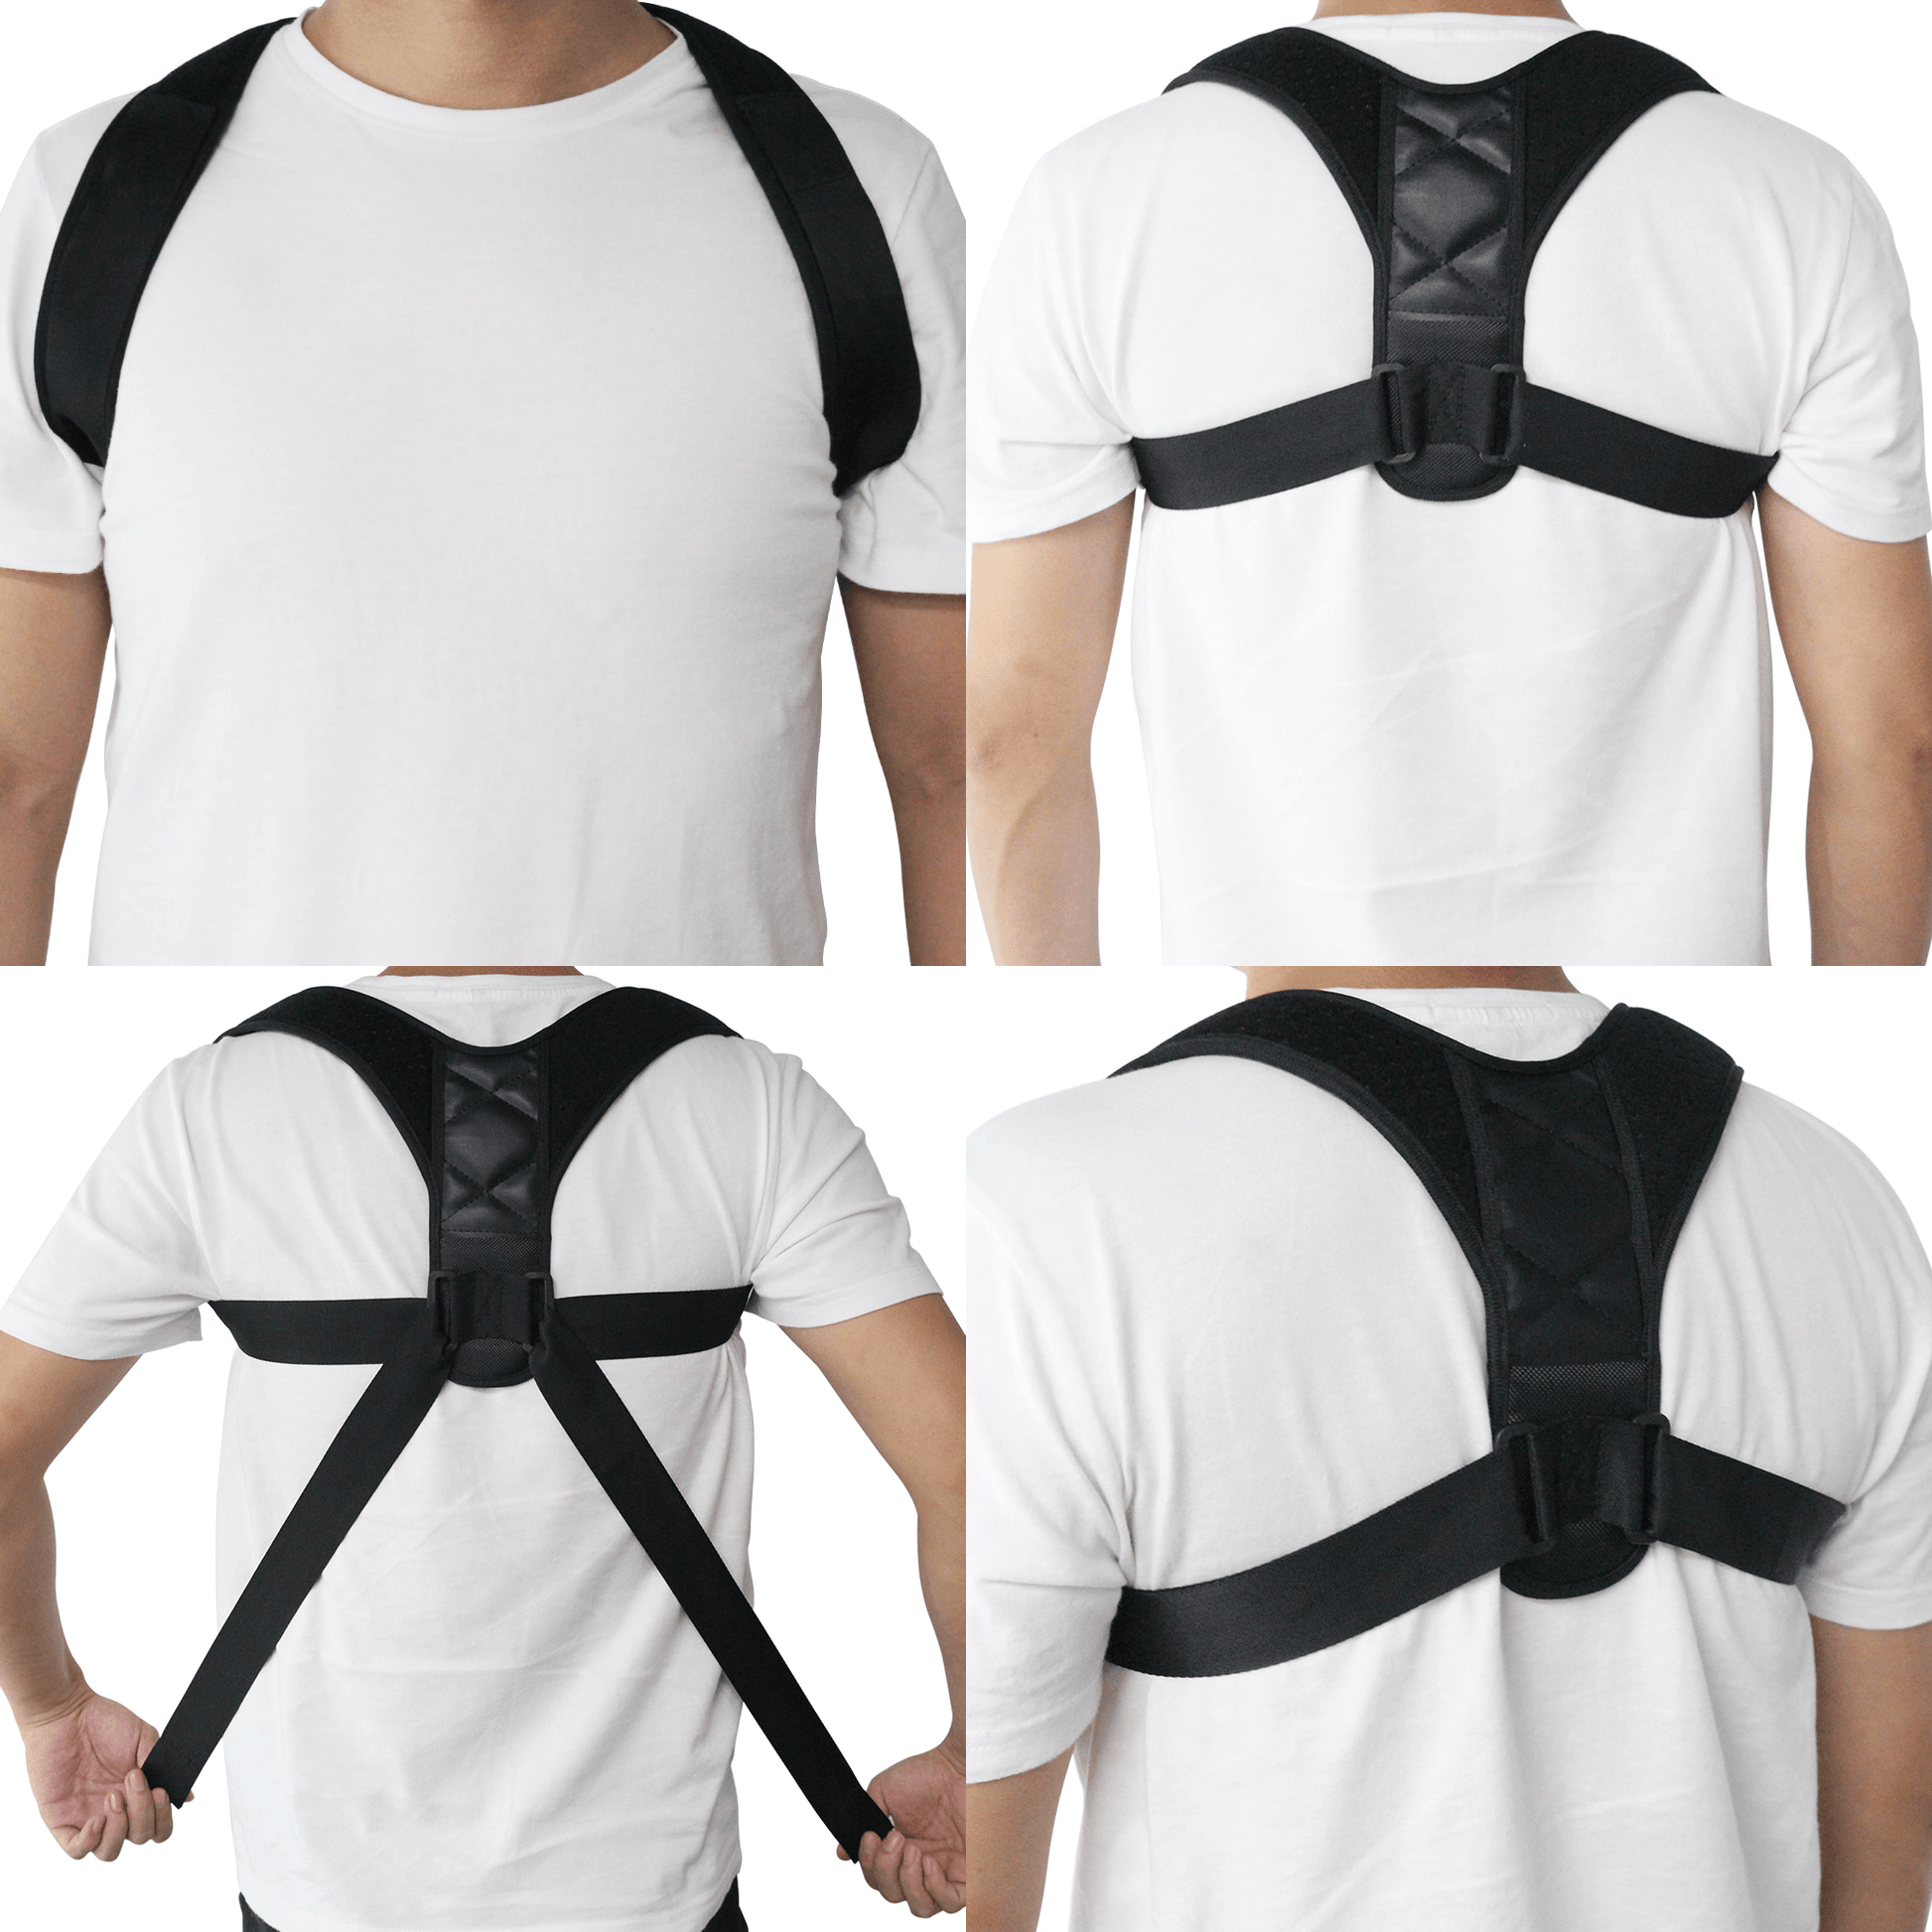 HealthyBody™ Posture Corrector (Adjustable to All Body Sizes) - asierno